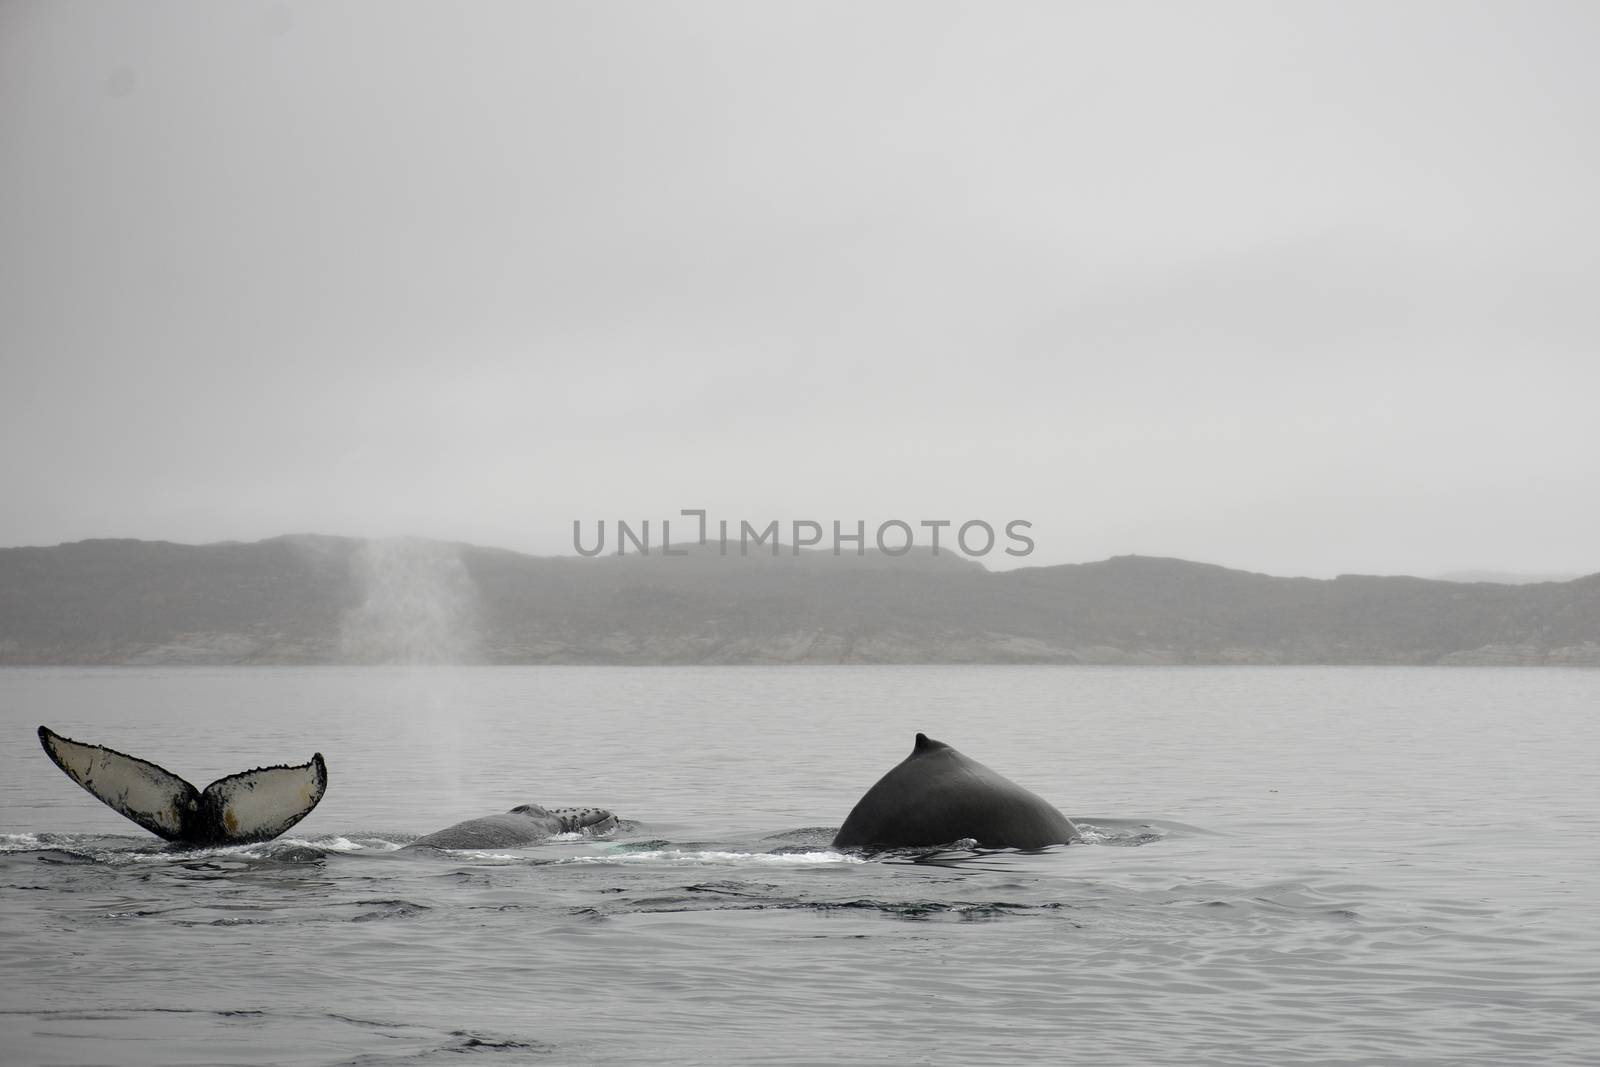 Humpback whales, Megaptera novaeangliae, showing blowhole, tail and dorsal fin